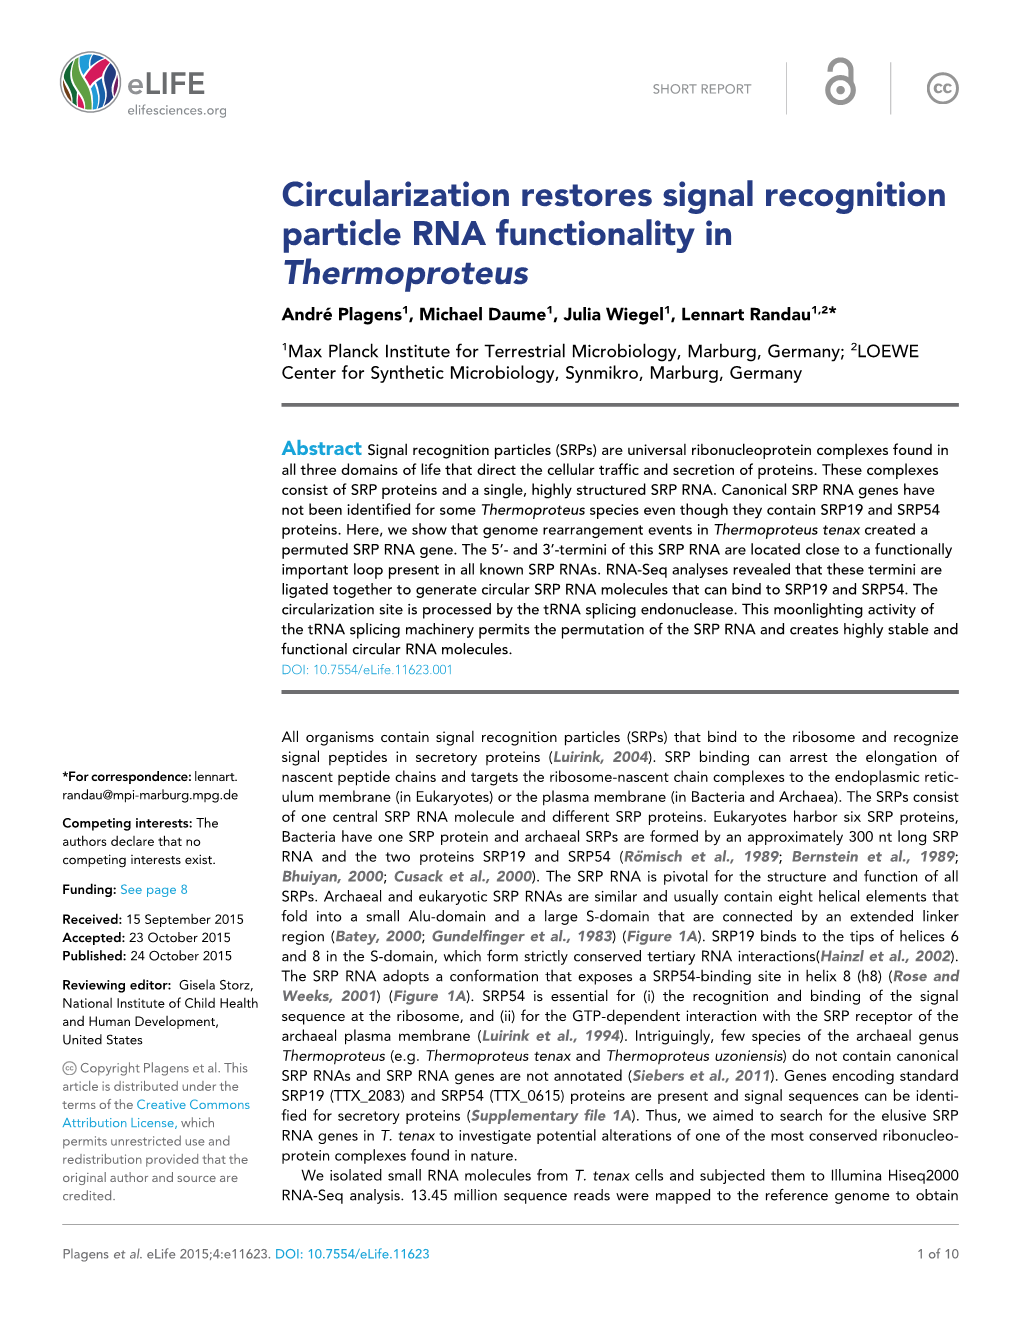 Circularization Restores Signal Recognition Particle RNA Functionality in Thermoproteus Andre´ Plagens1, Michael Daume1, Julia Wiegel1, Lennart Randau1,2*